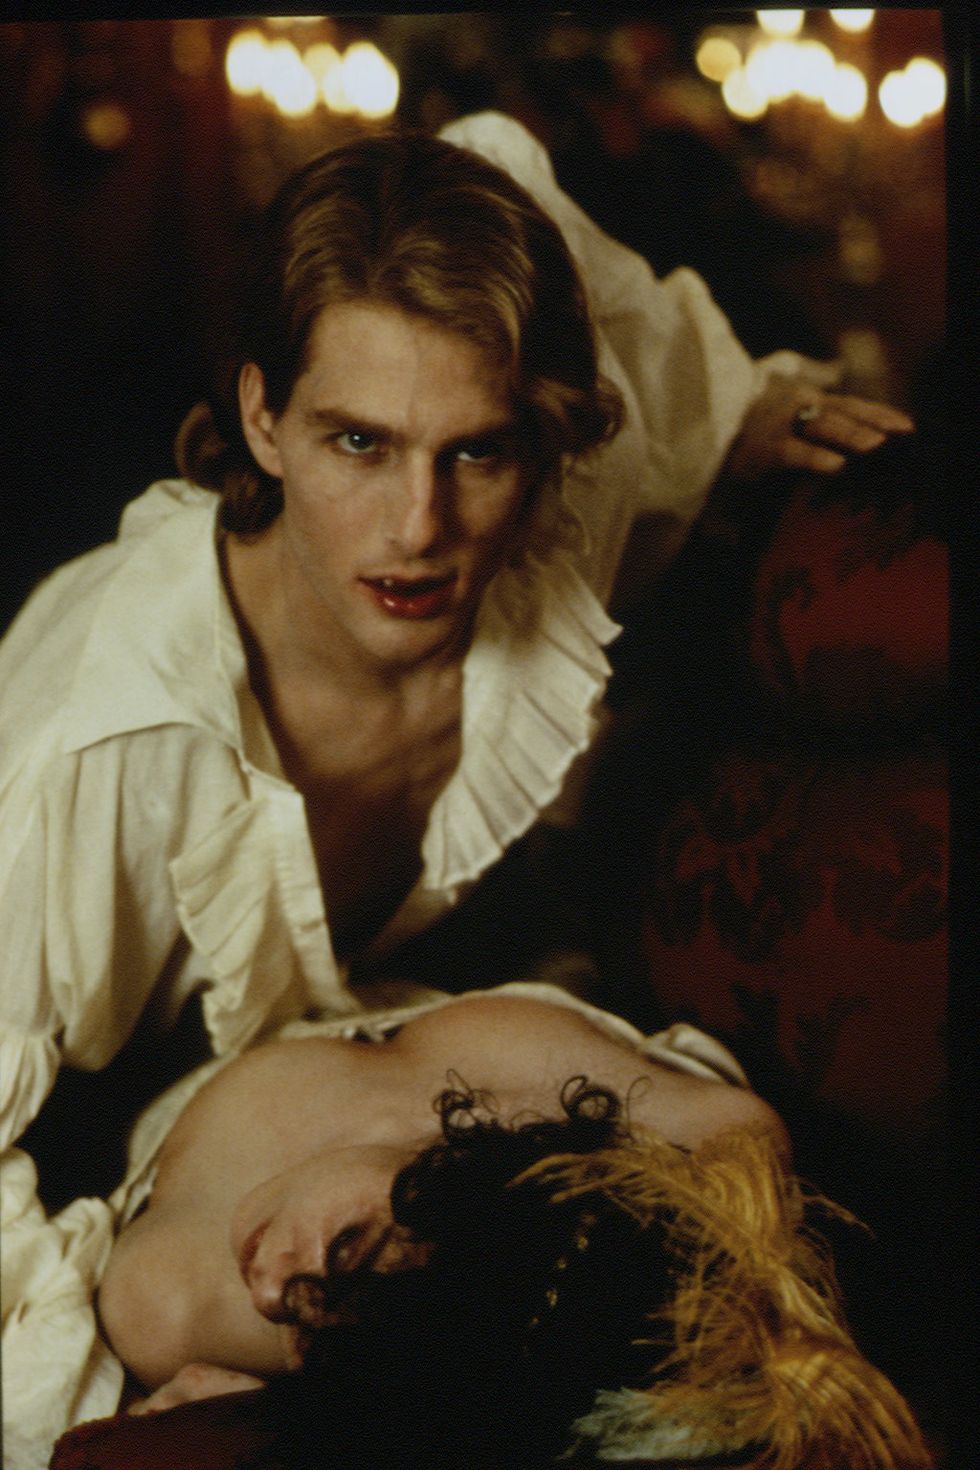 film 'interview with the vampire' by neil jordan